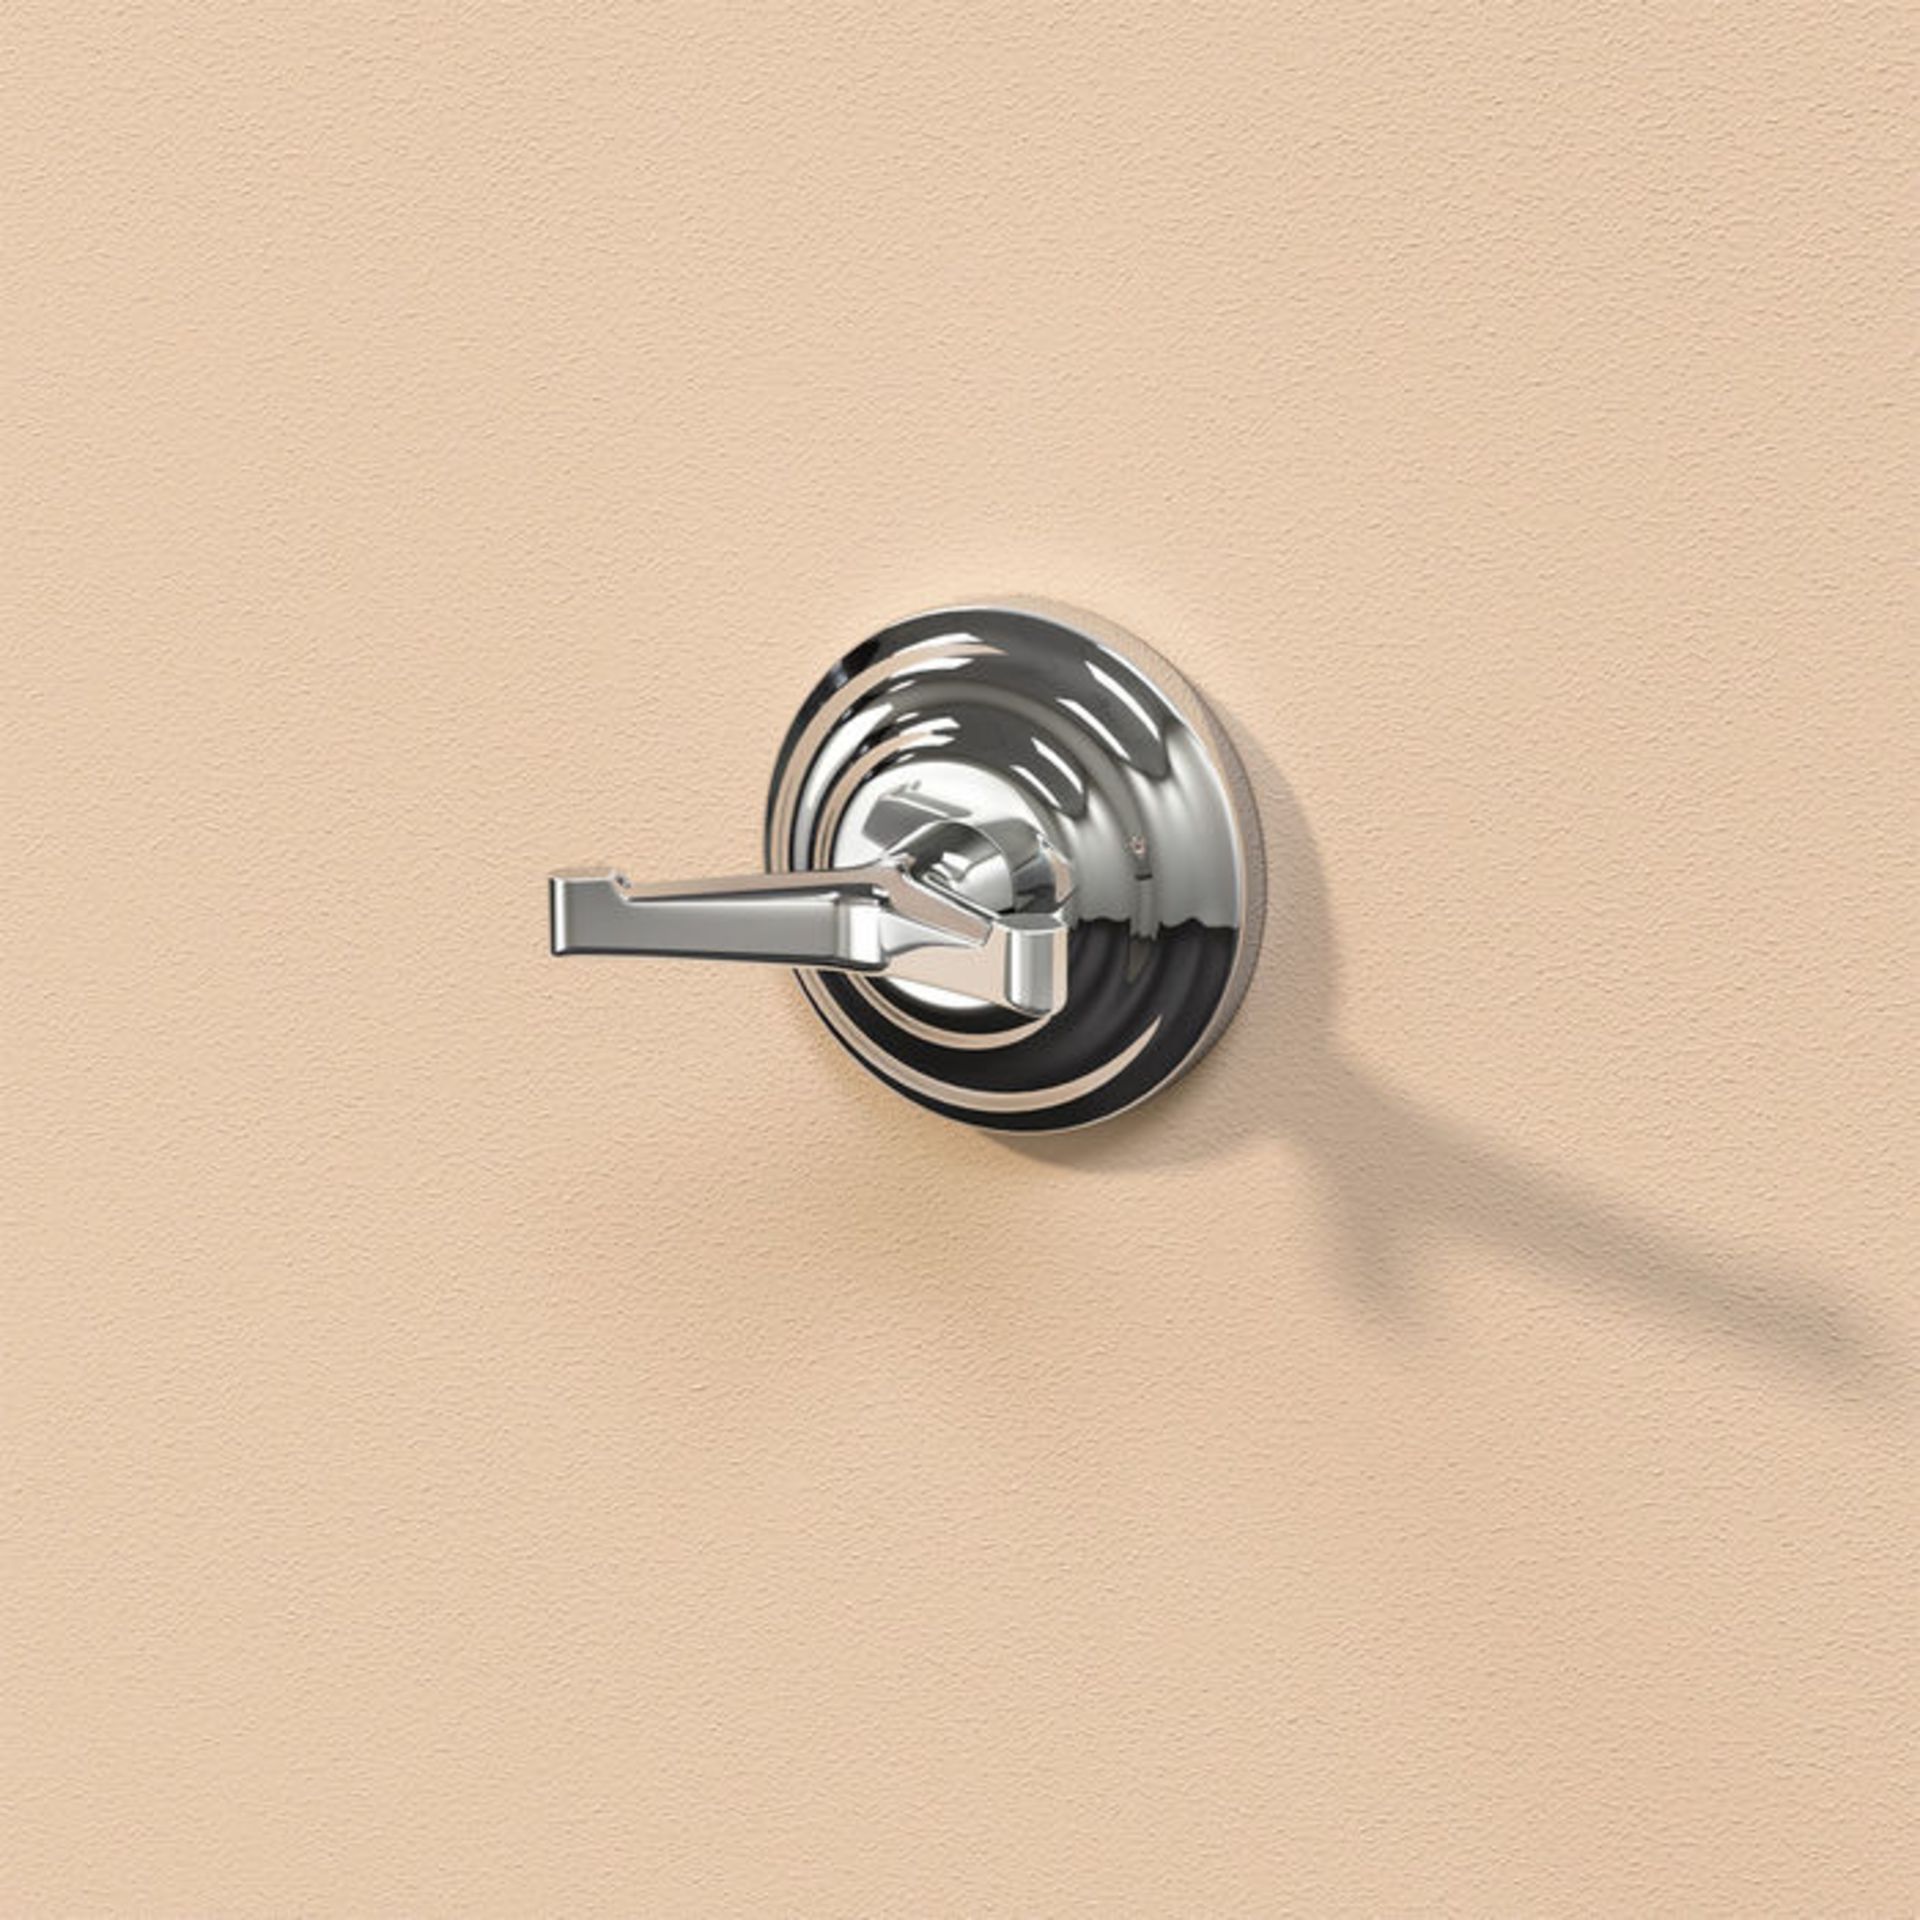 (W30) York Robe Hook Finishes your bathroom with a little extra functionality and style Made with - Image 2 of 3